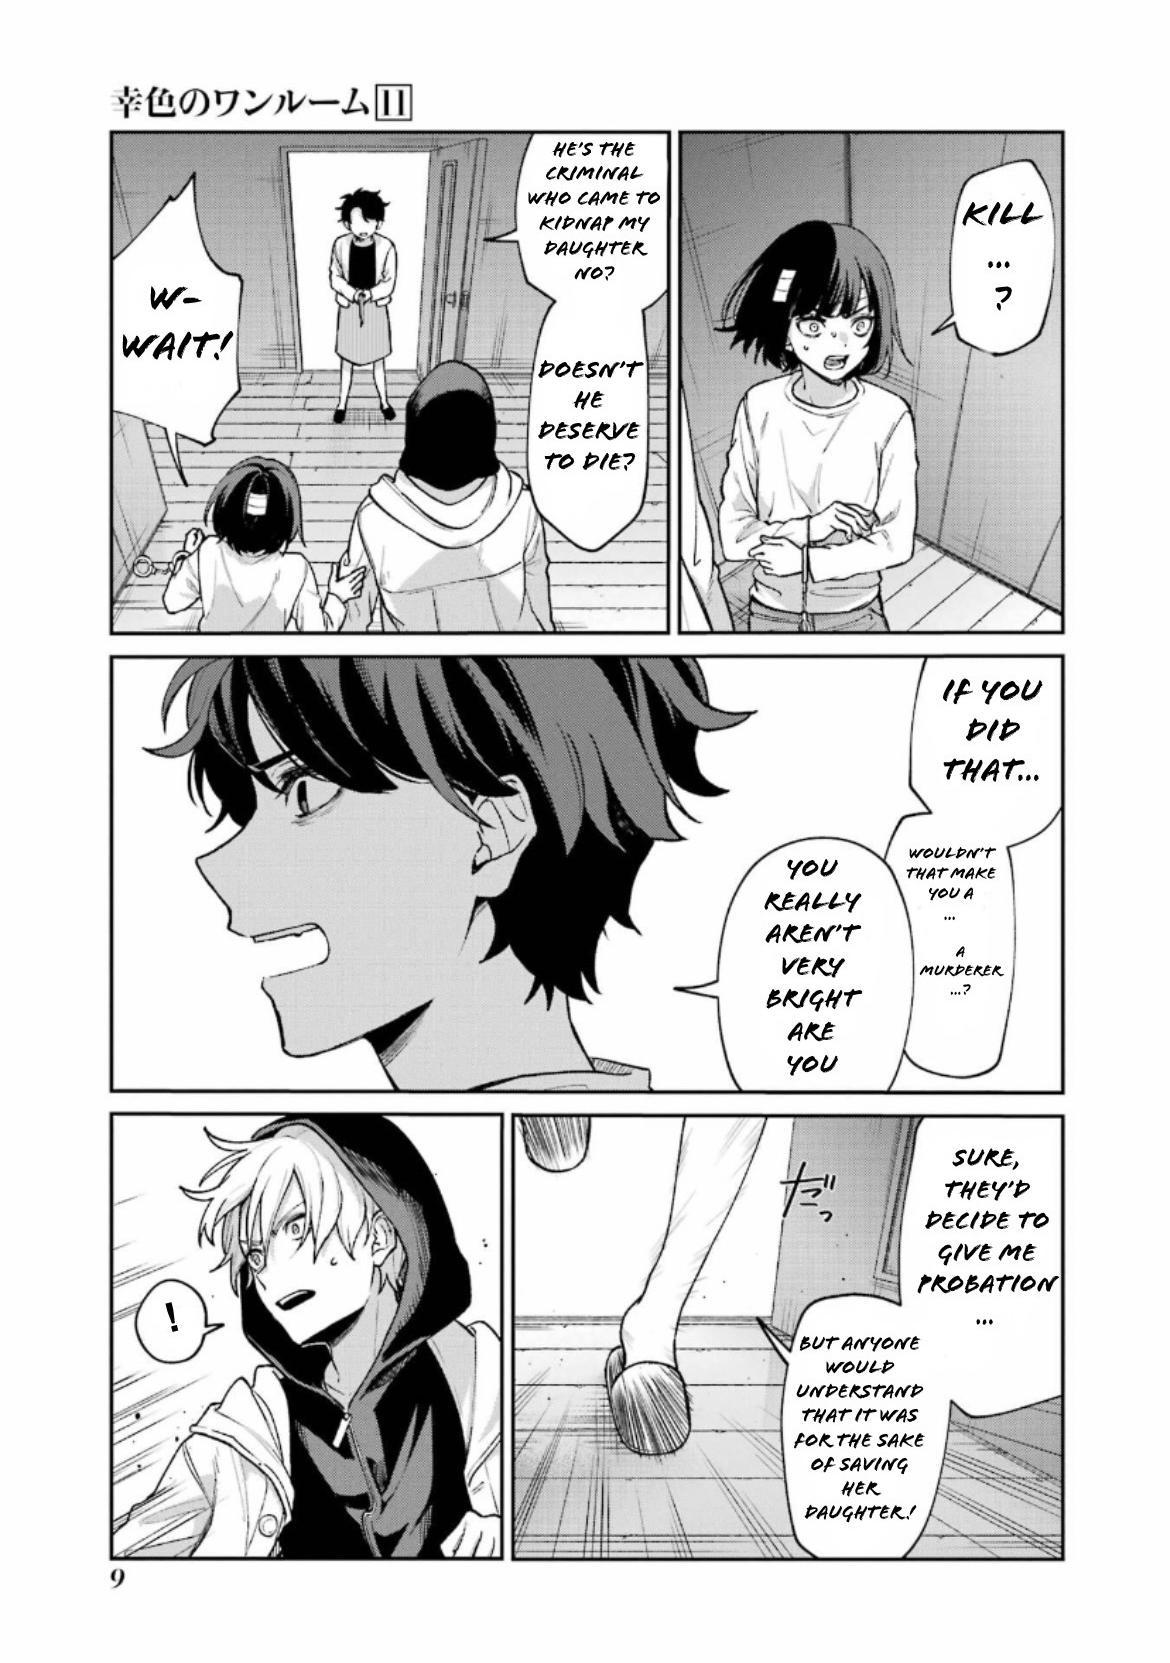 DISC] Sachiiro no One Room (One Room of Happiness) - Ch. 63-68.5